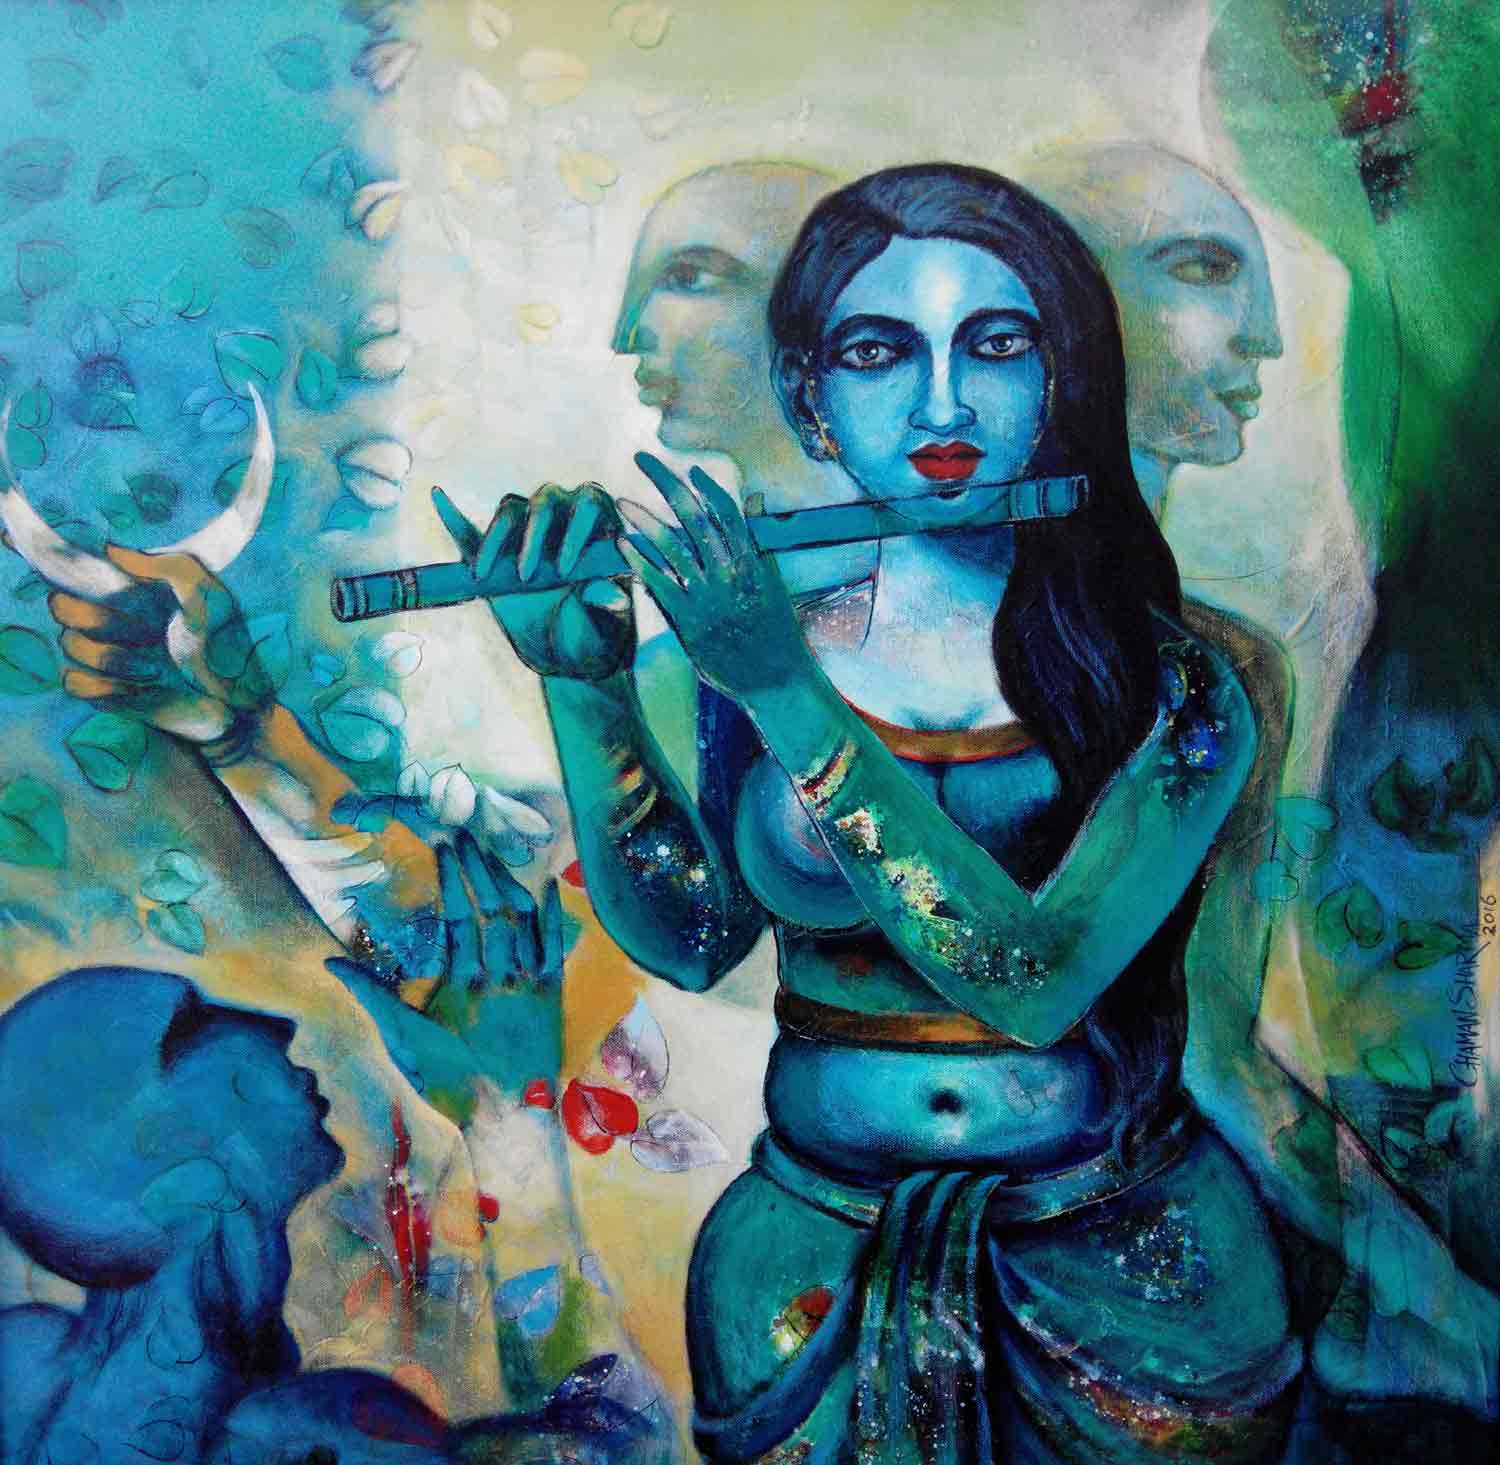 Conceptual Painting with Acrylic on Canvas "Song of Happiness" art by Chaman Sharma